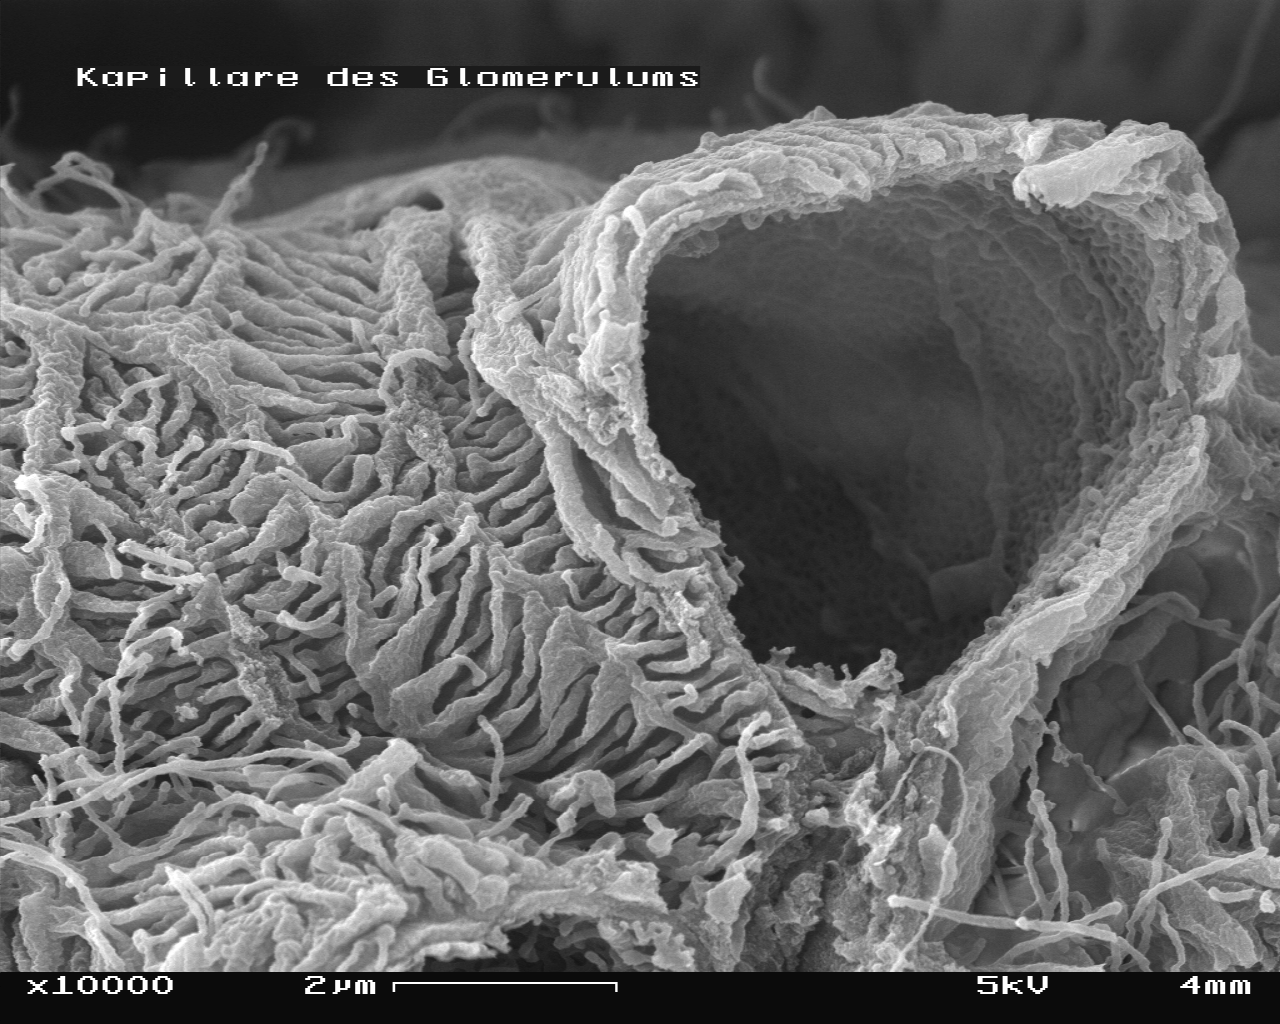 Mouse glomerulus in the SEM with one capillary broken, magnification 10,000x